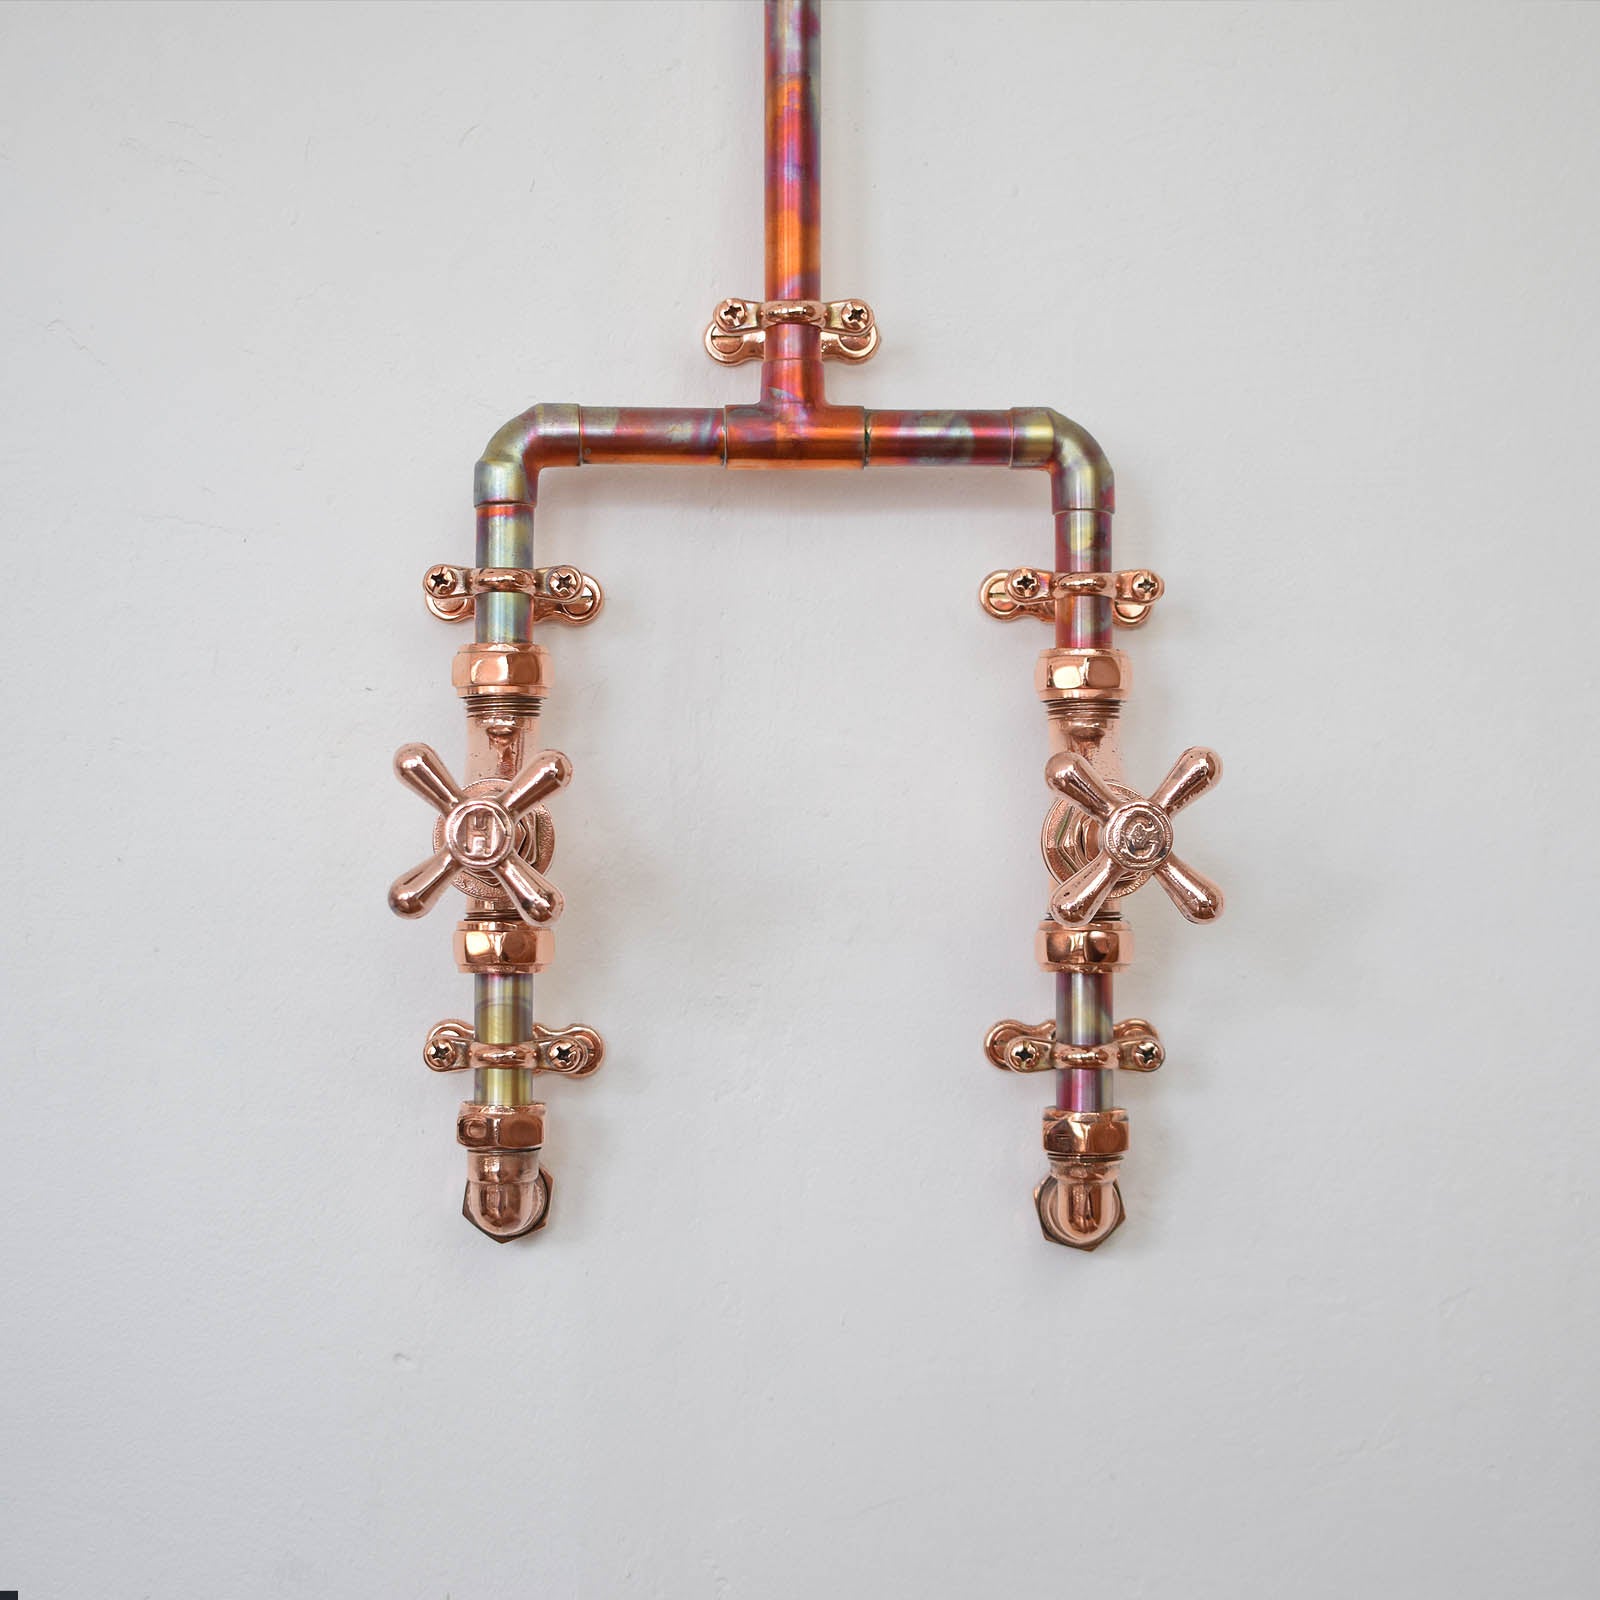 High-polish crosshead tap turns on the Marbled Copper Mixer Shower Marblista.